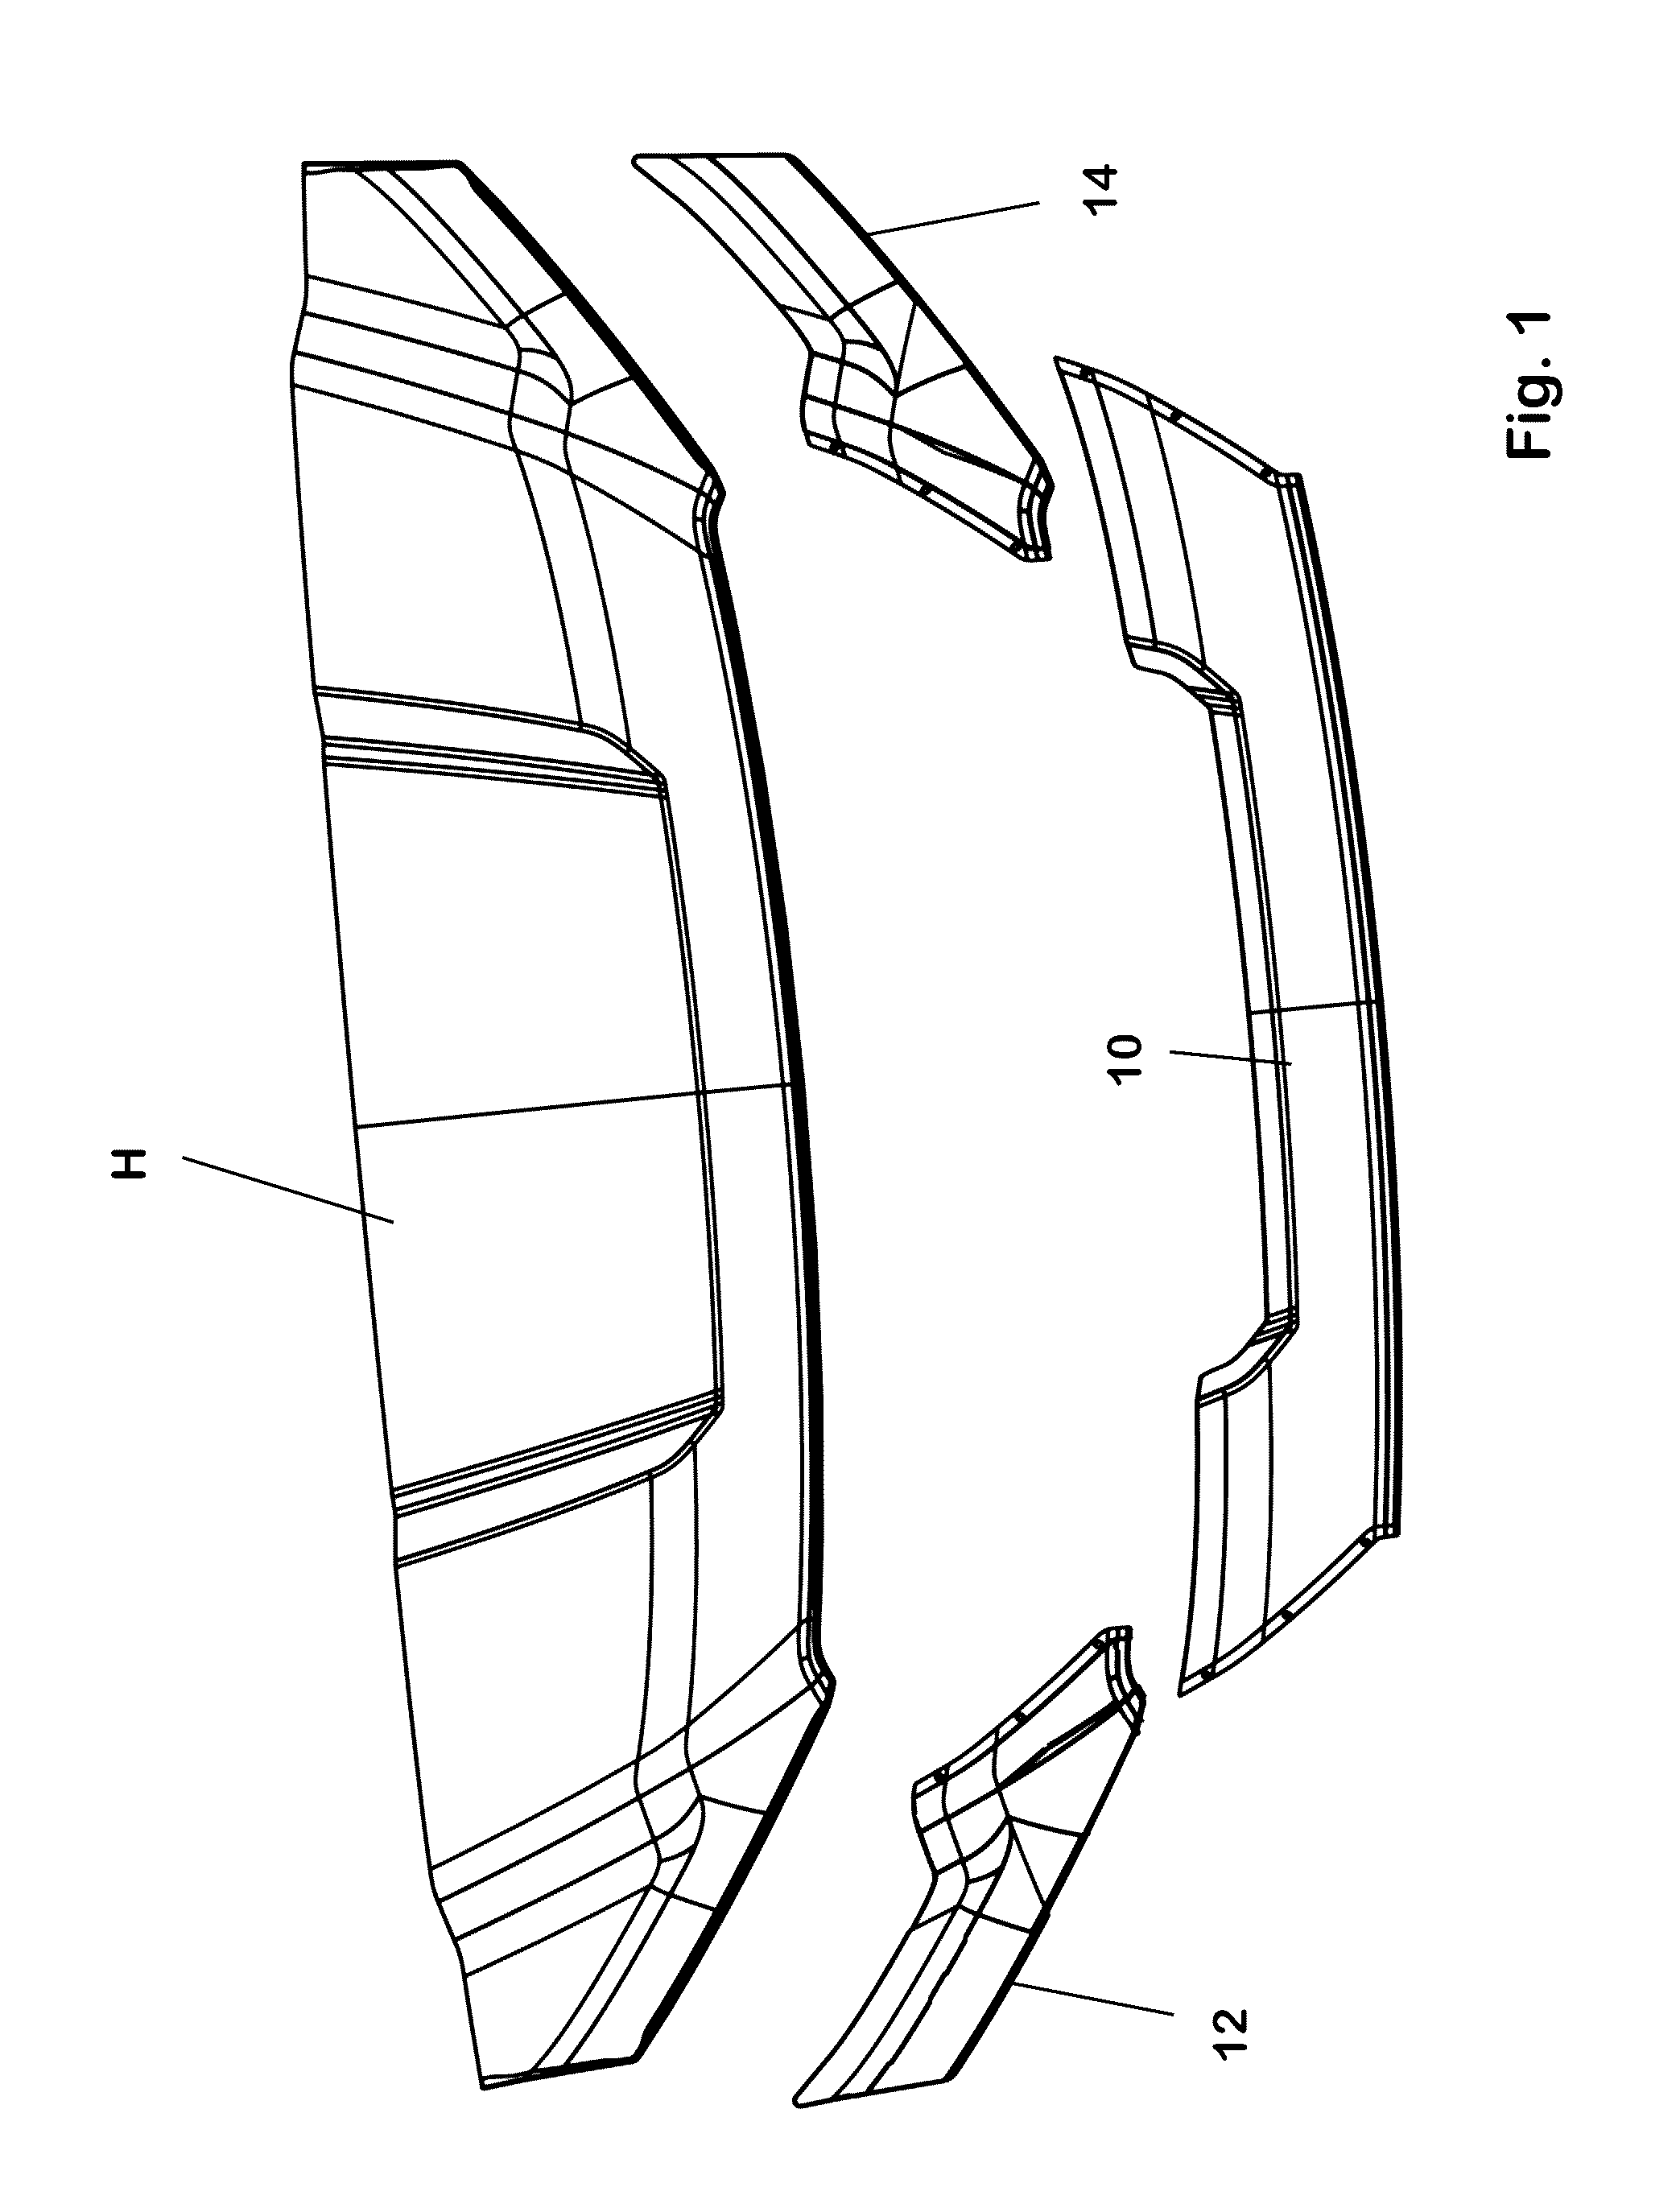 Interlocking multipiece vehicle front end protective device